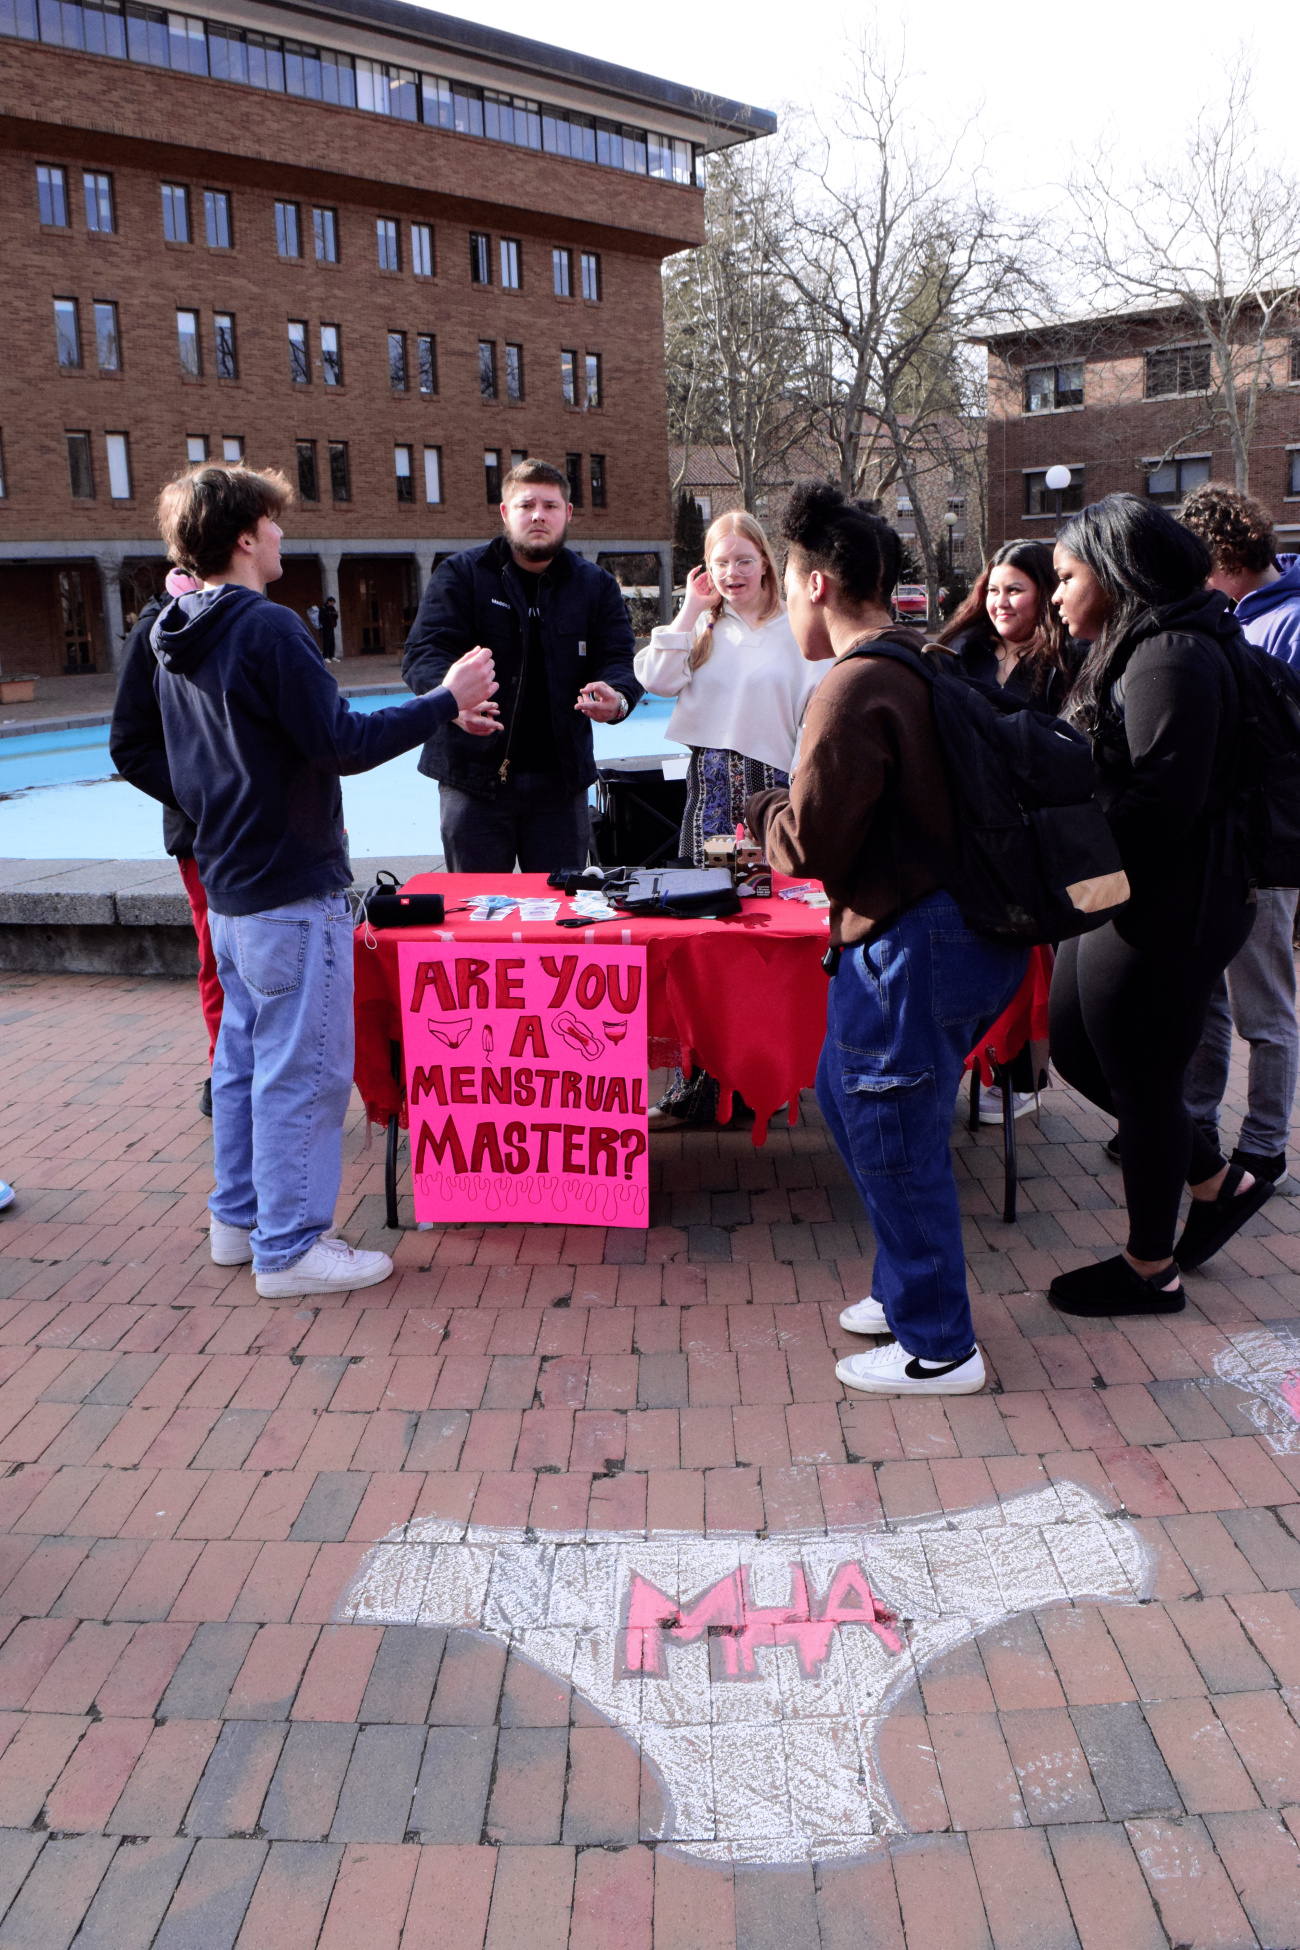 People cstanding near table decorated with red tableclothe and posters, and chalk drawing on brick ground